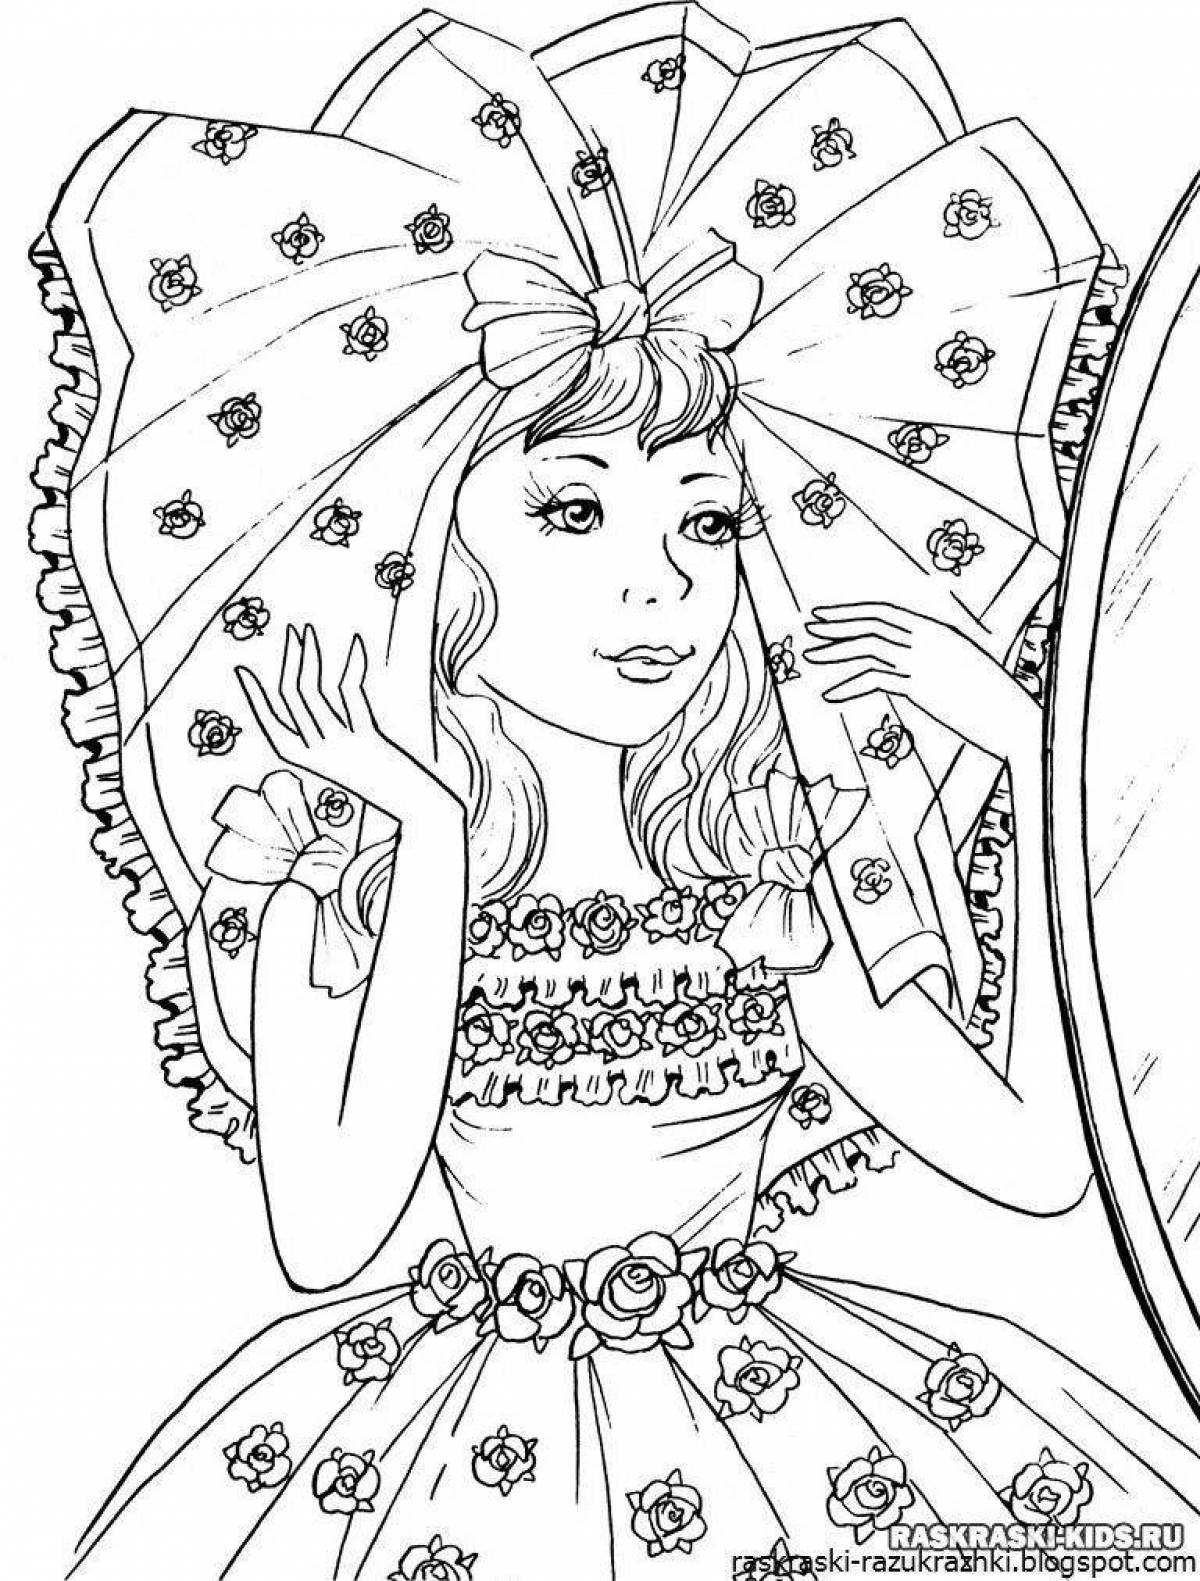 Great coloring book for girls 9-10 years old